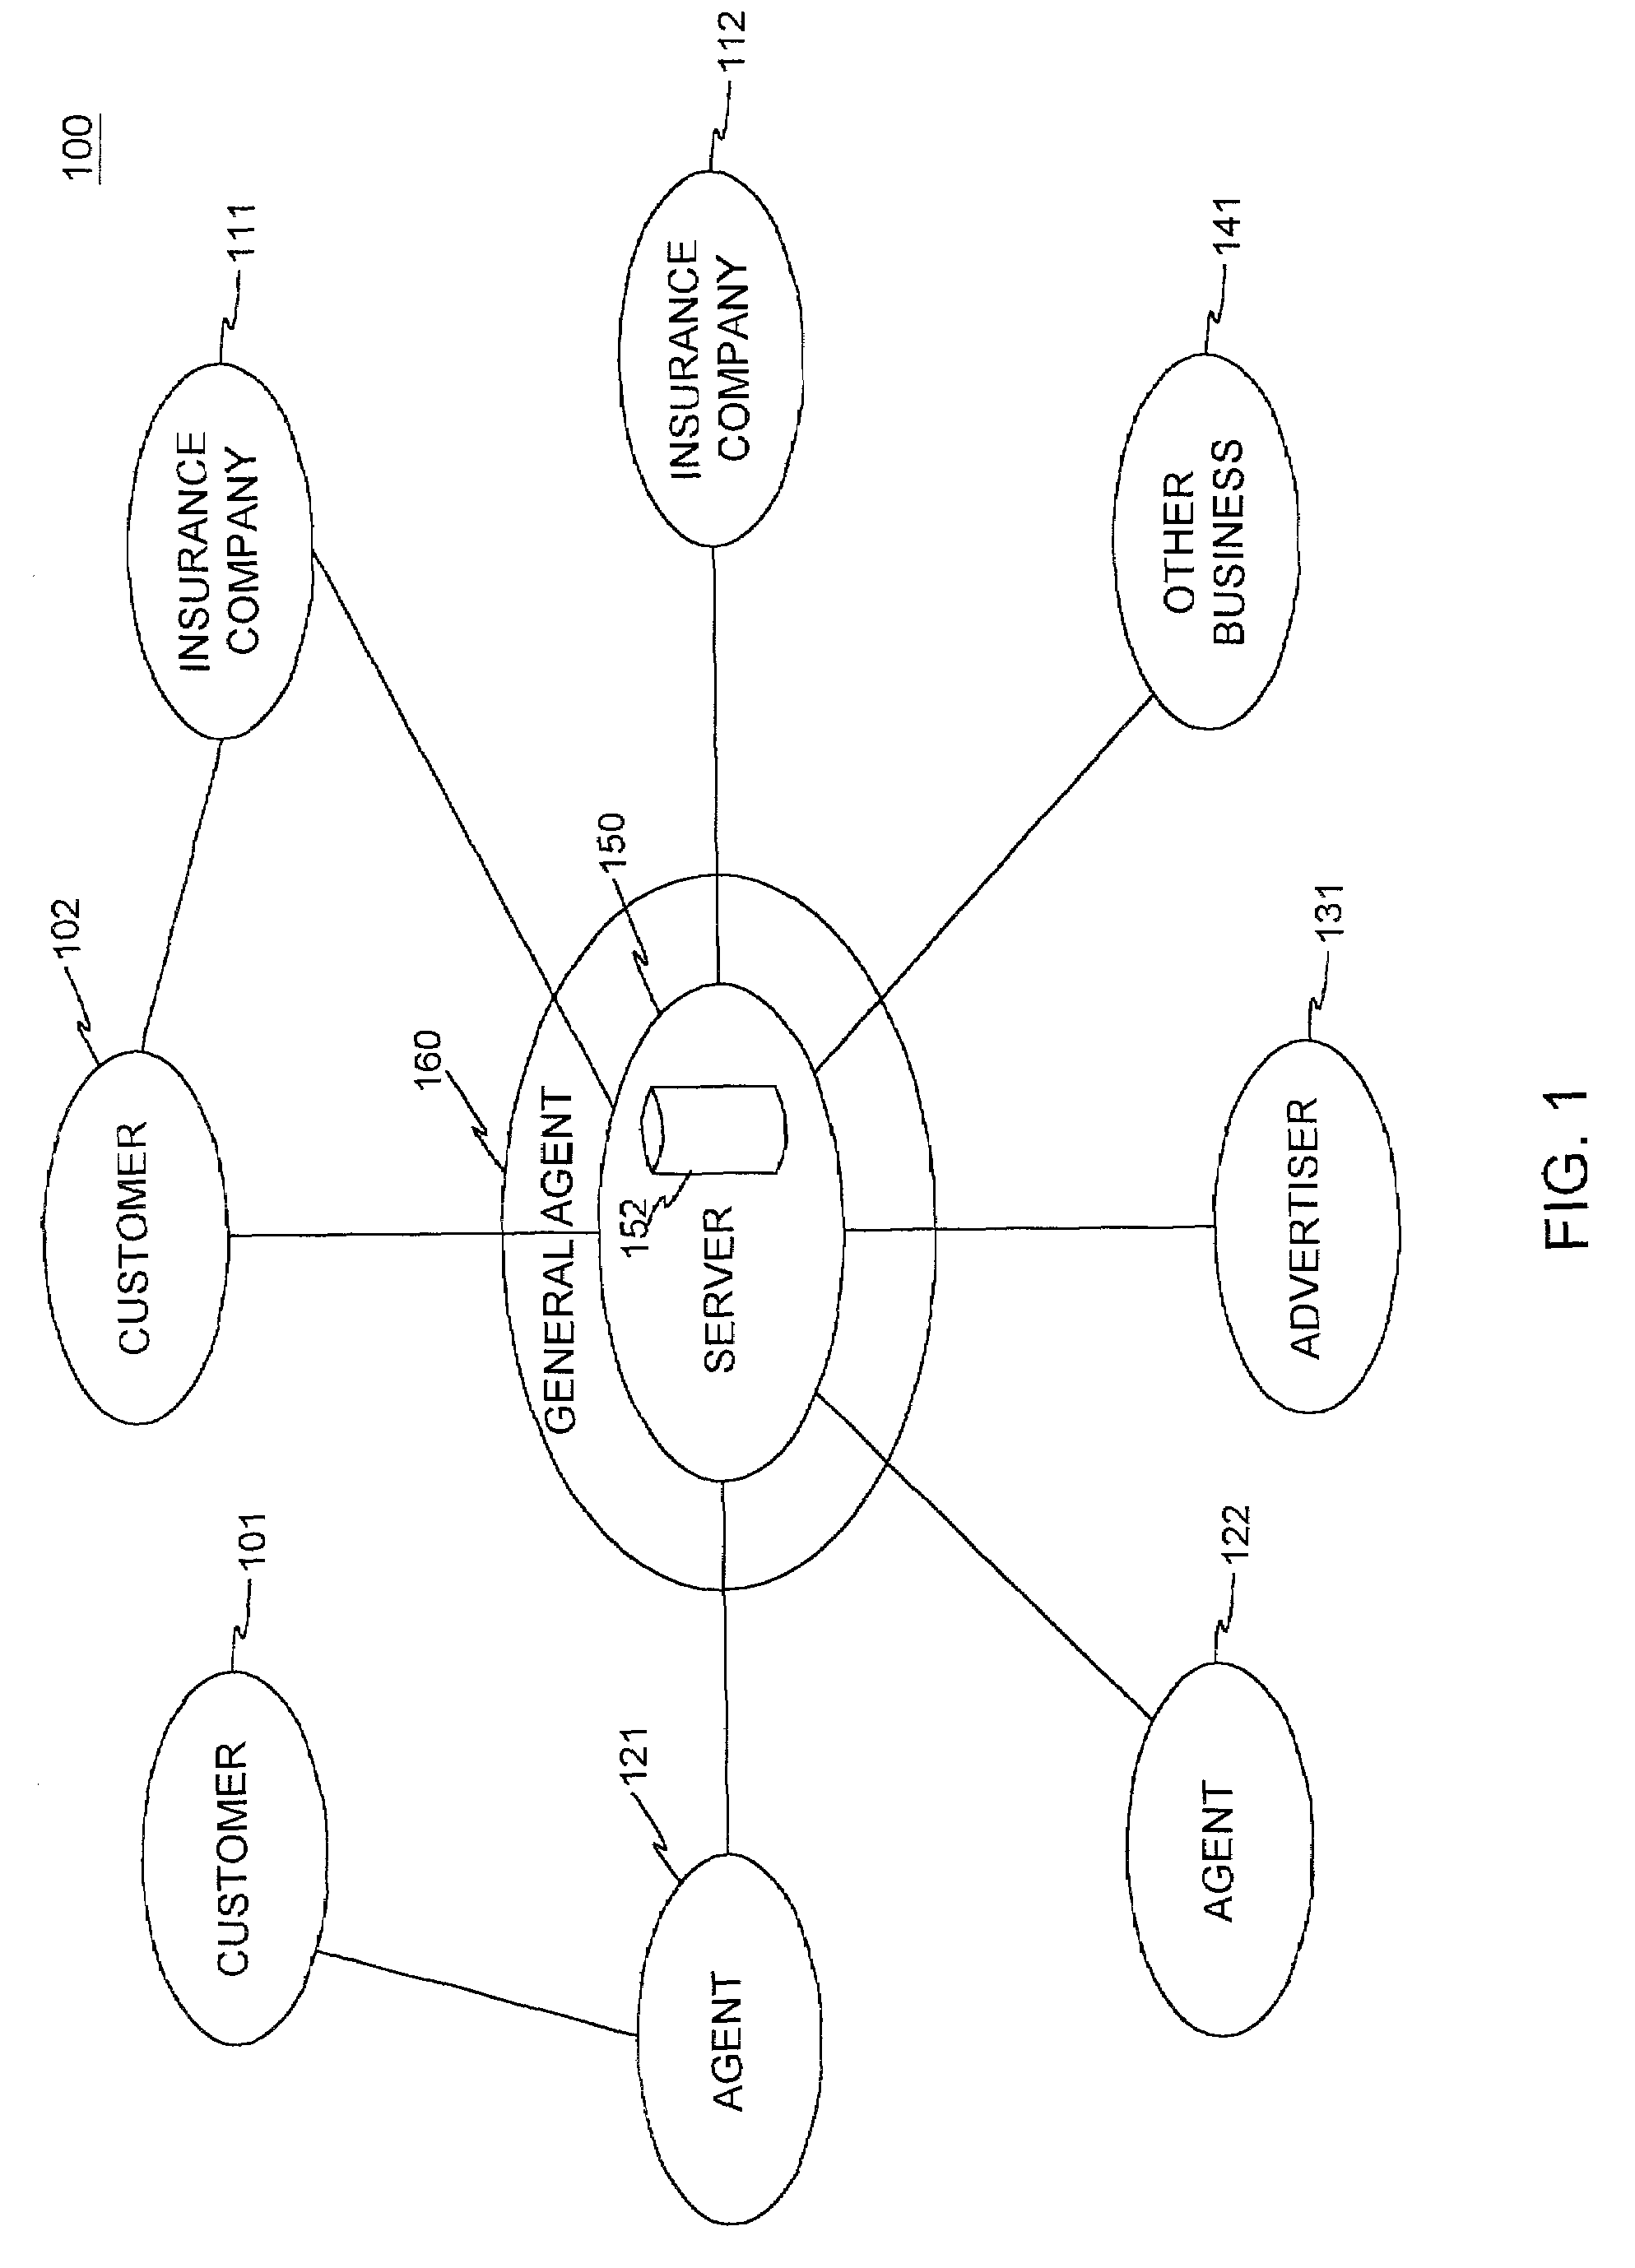 System and method of dispensing insurance through a computer network